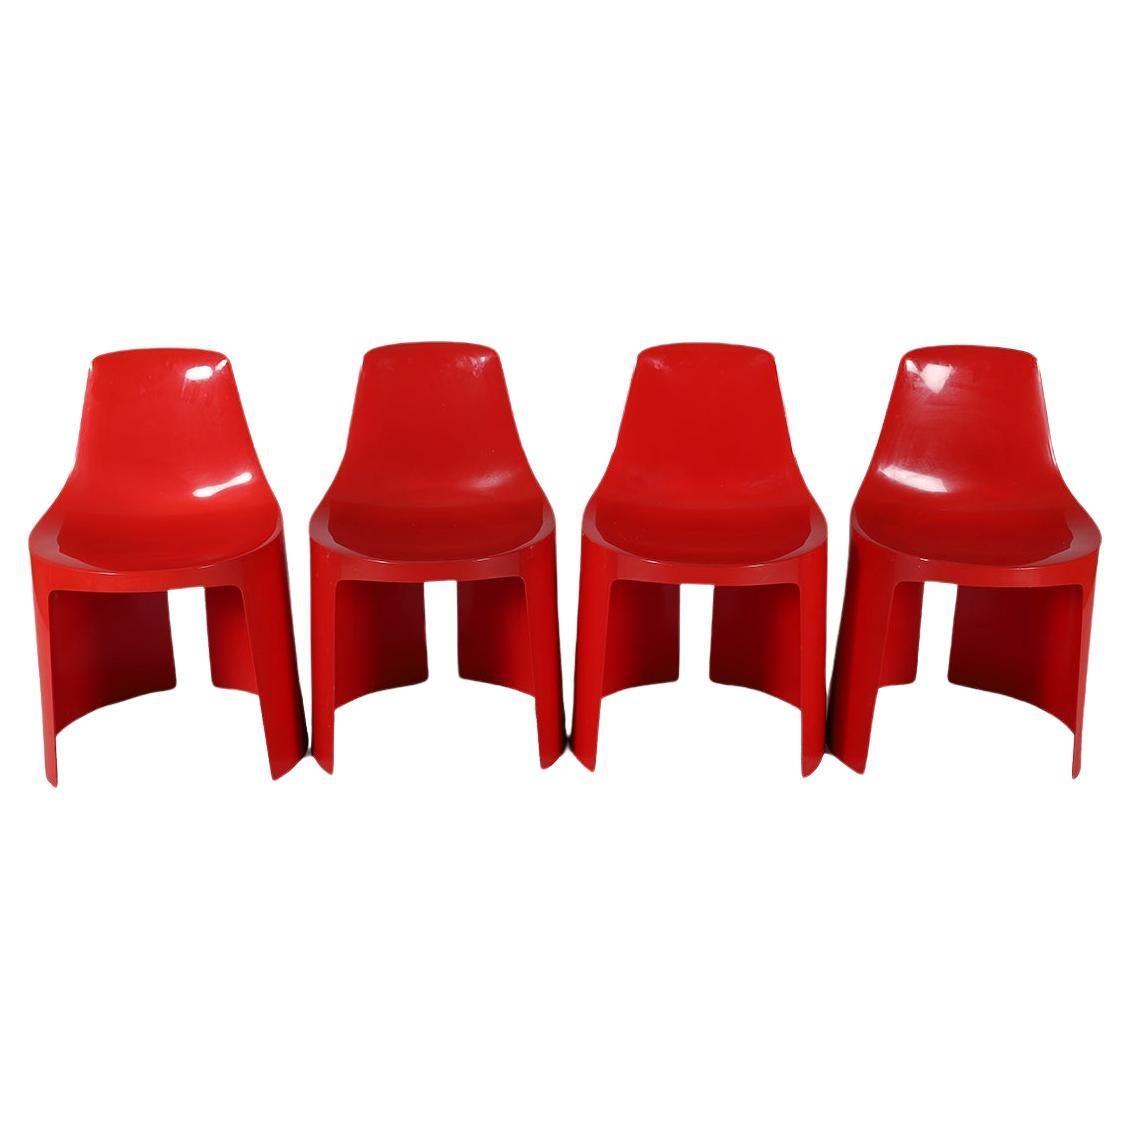  'Umbo' Red Molded Plastic Stacking Chair Set by Kay LeRoy Ruggles For Sale